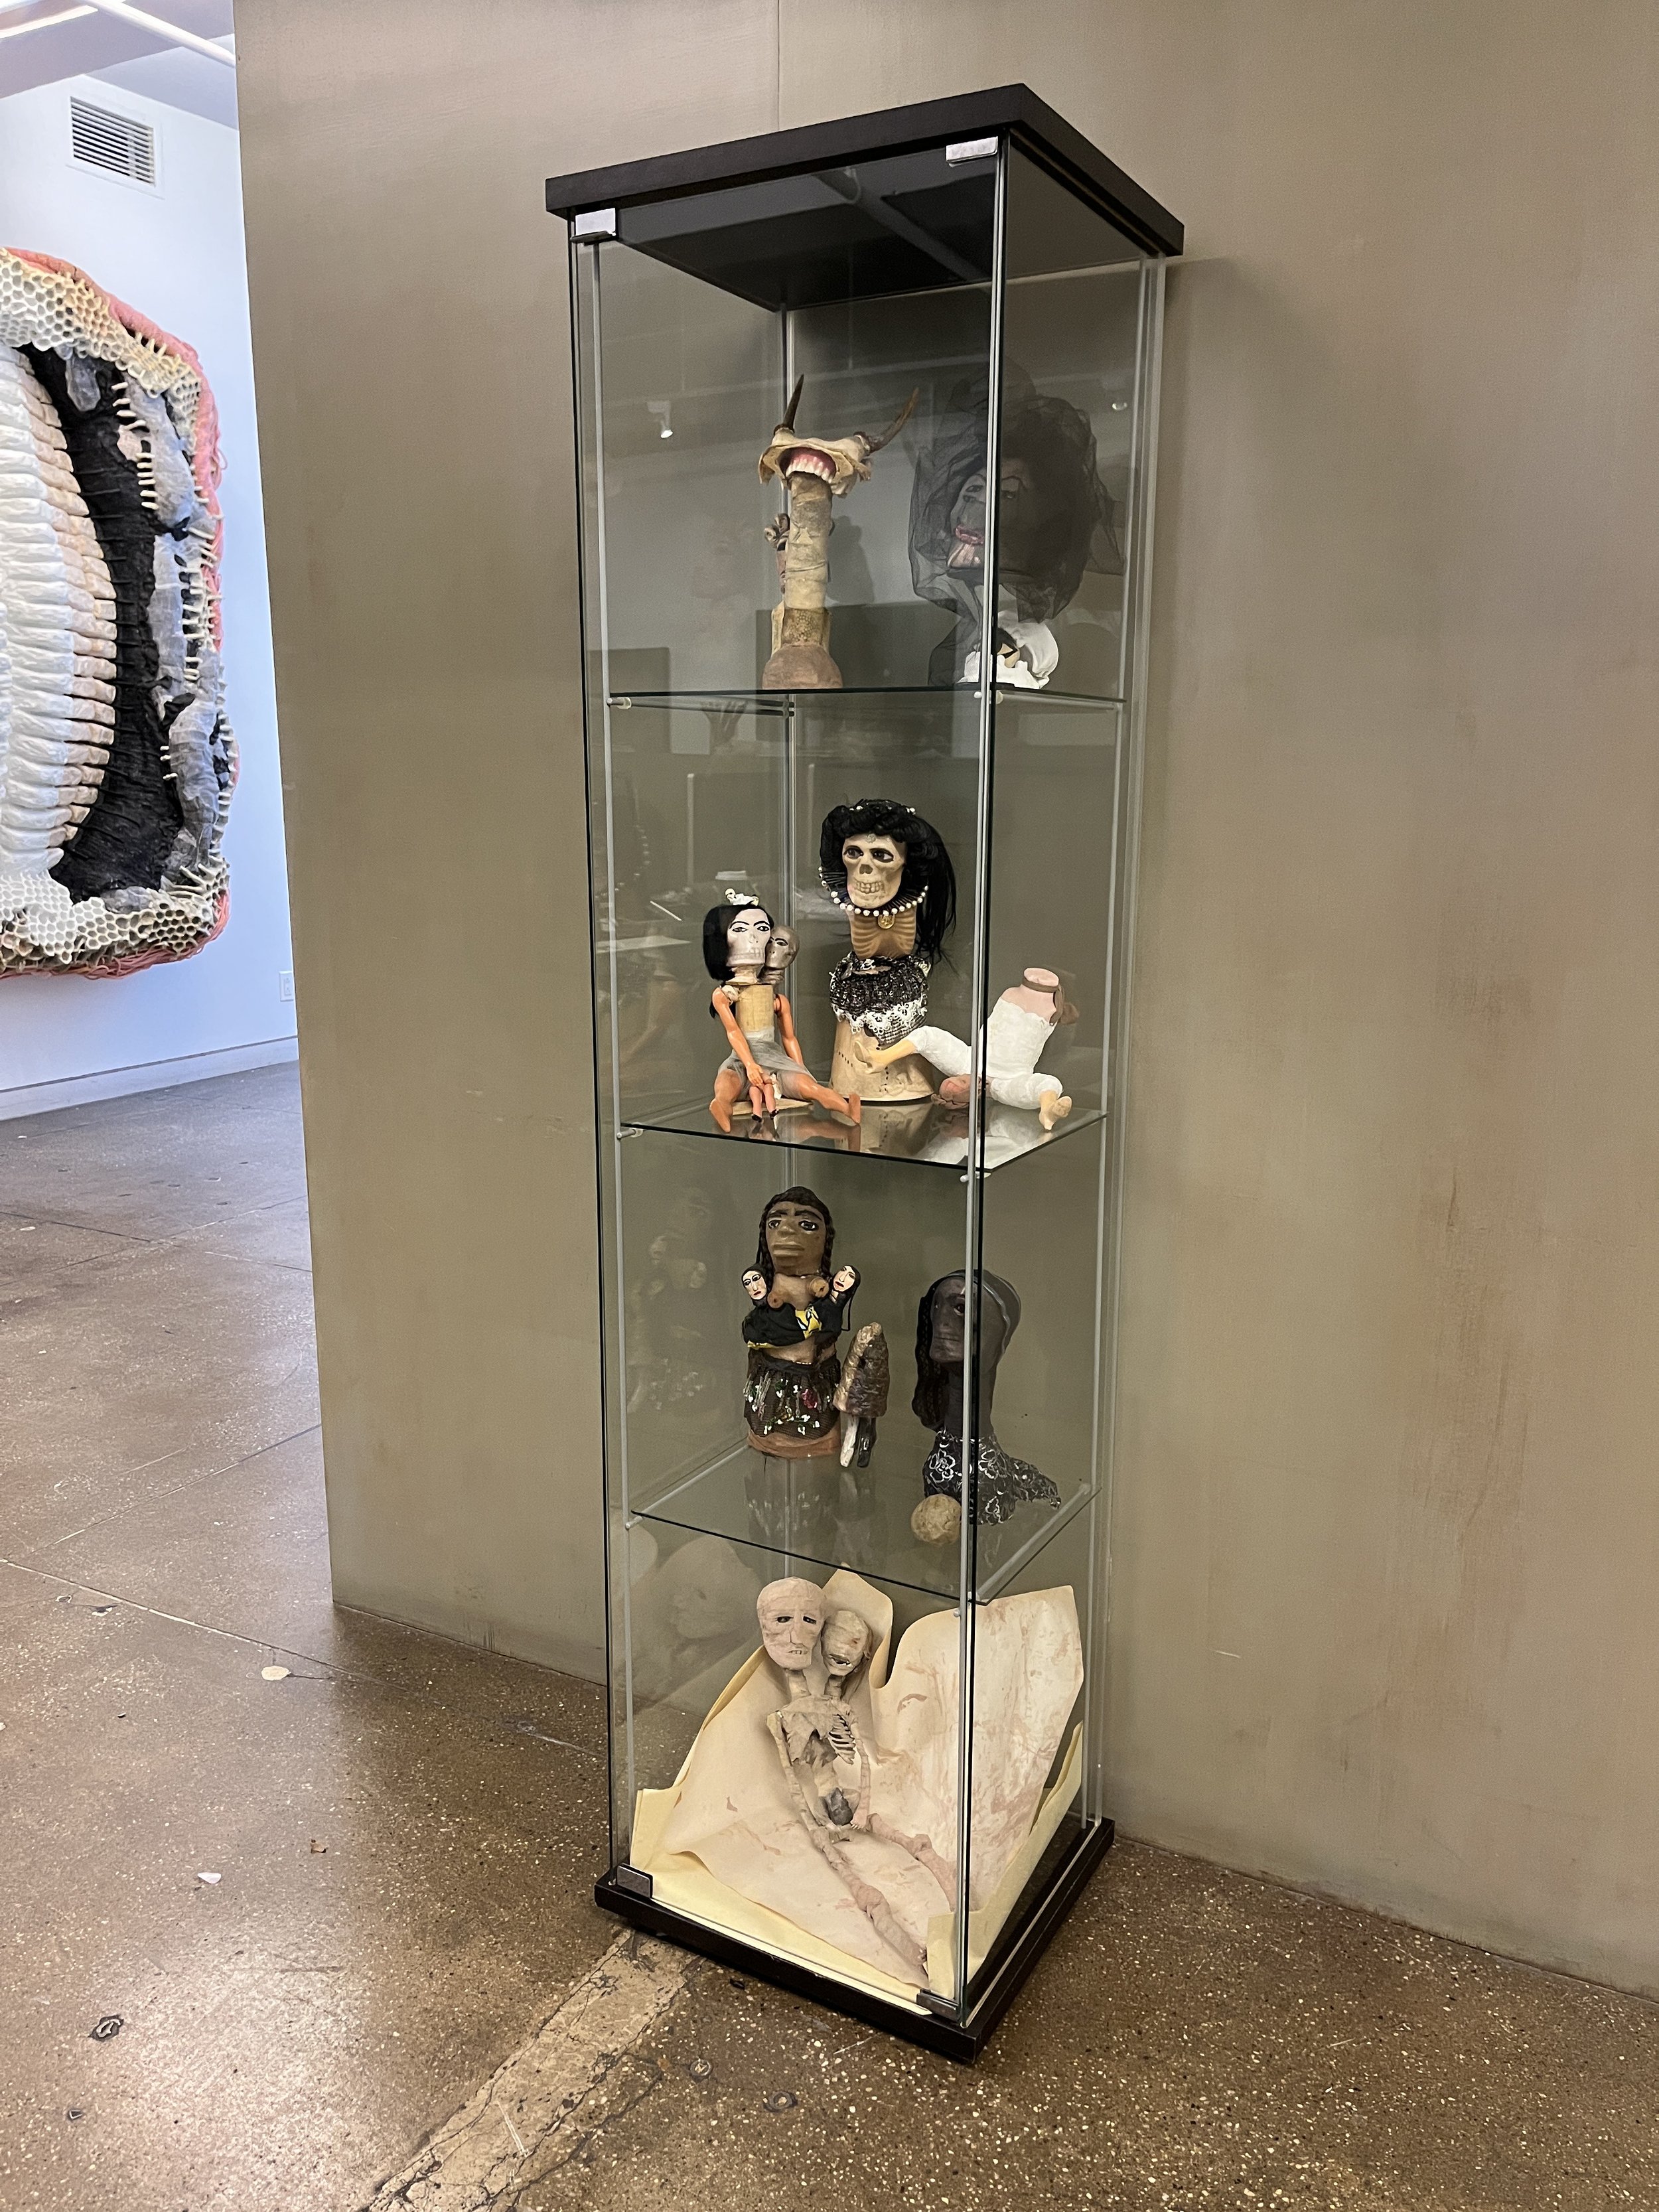   Samira Abbassy   A Confessional Autobiography Told in Archetypes through Effigies, Idols, Saints and Martyrs  2015-2022 Various materials Glass Cabinet: 63x14x15 inches 